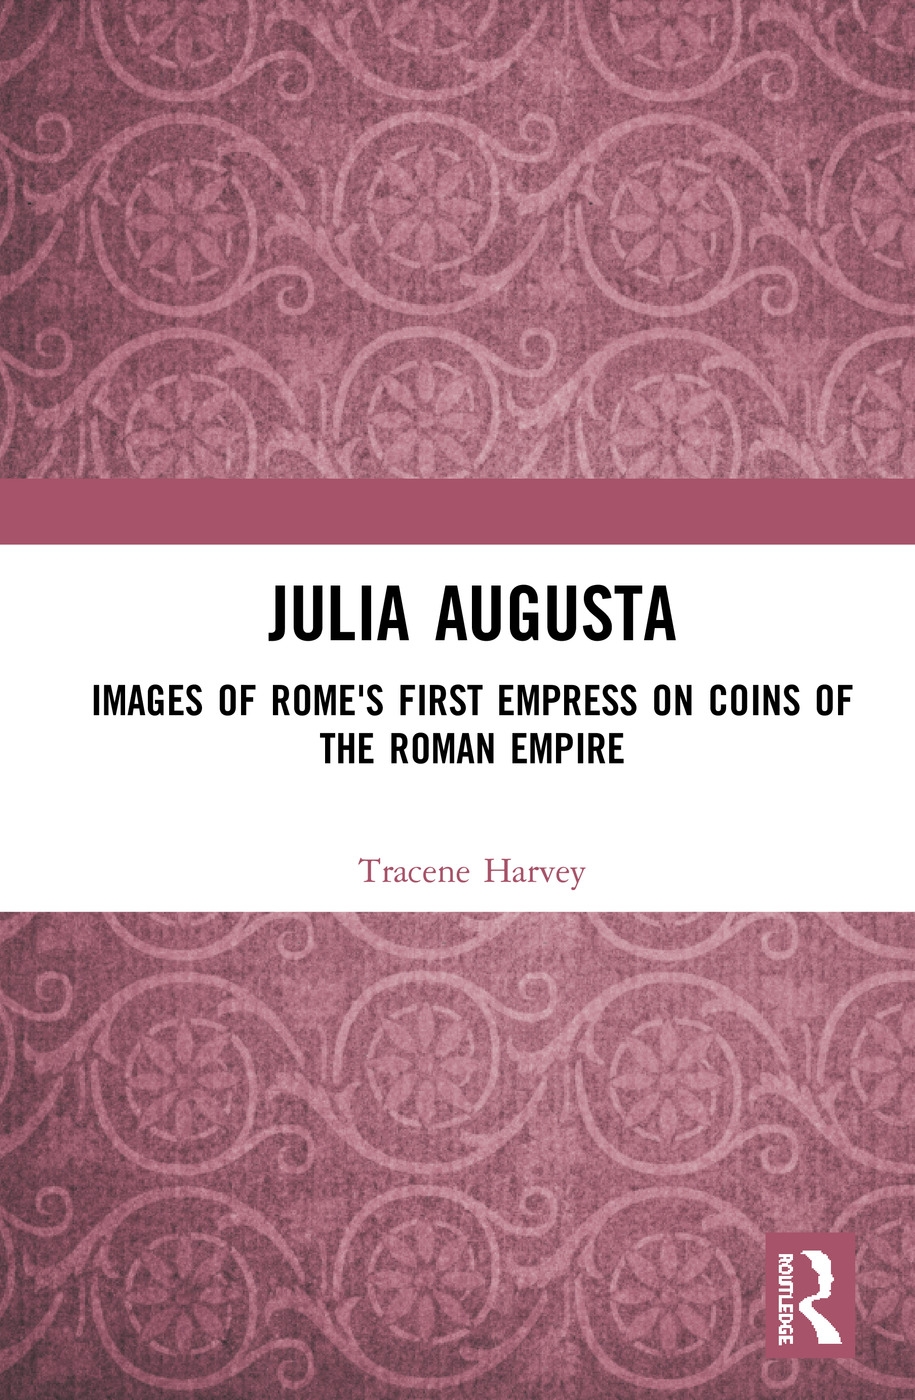 Julia Augusta: Images of Rome’s First Empress on Coins of the Roman Empire